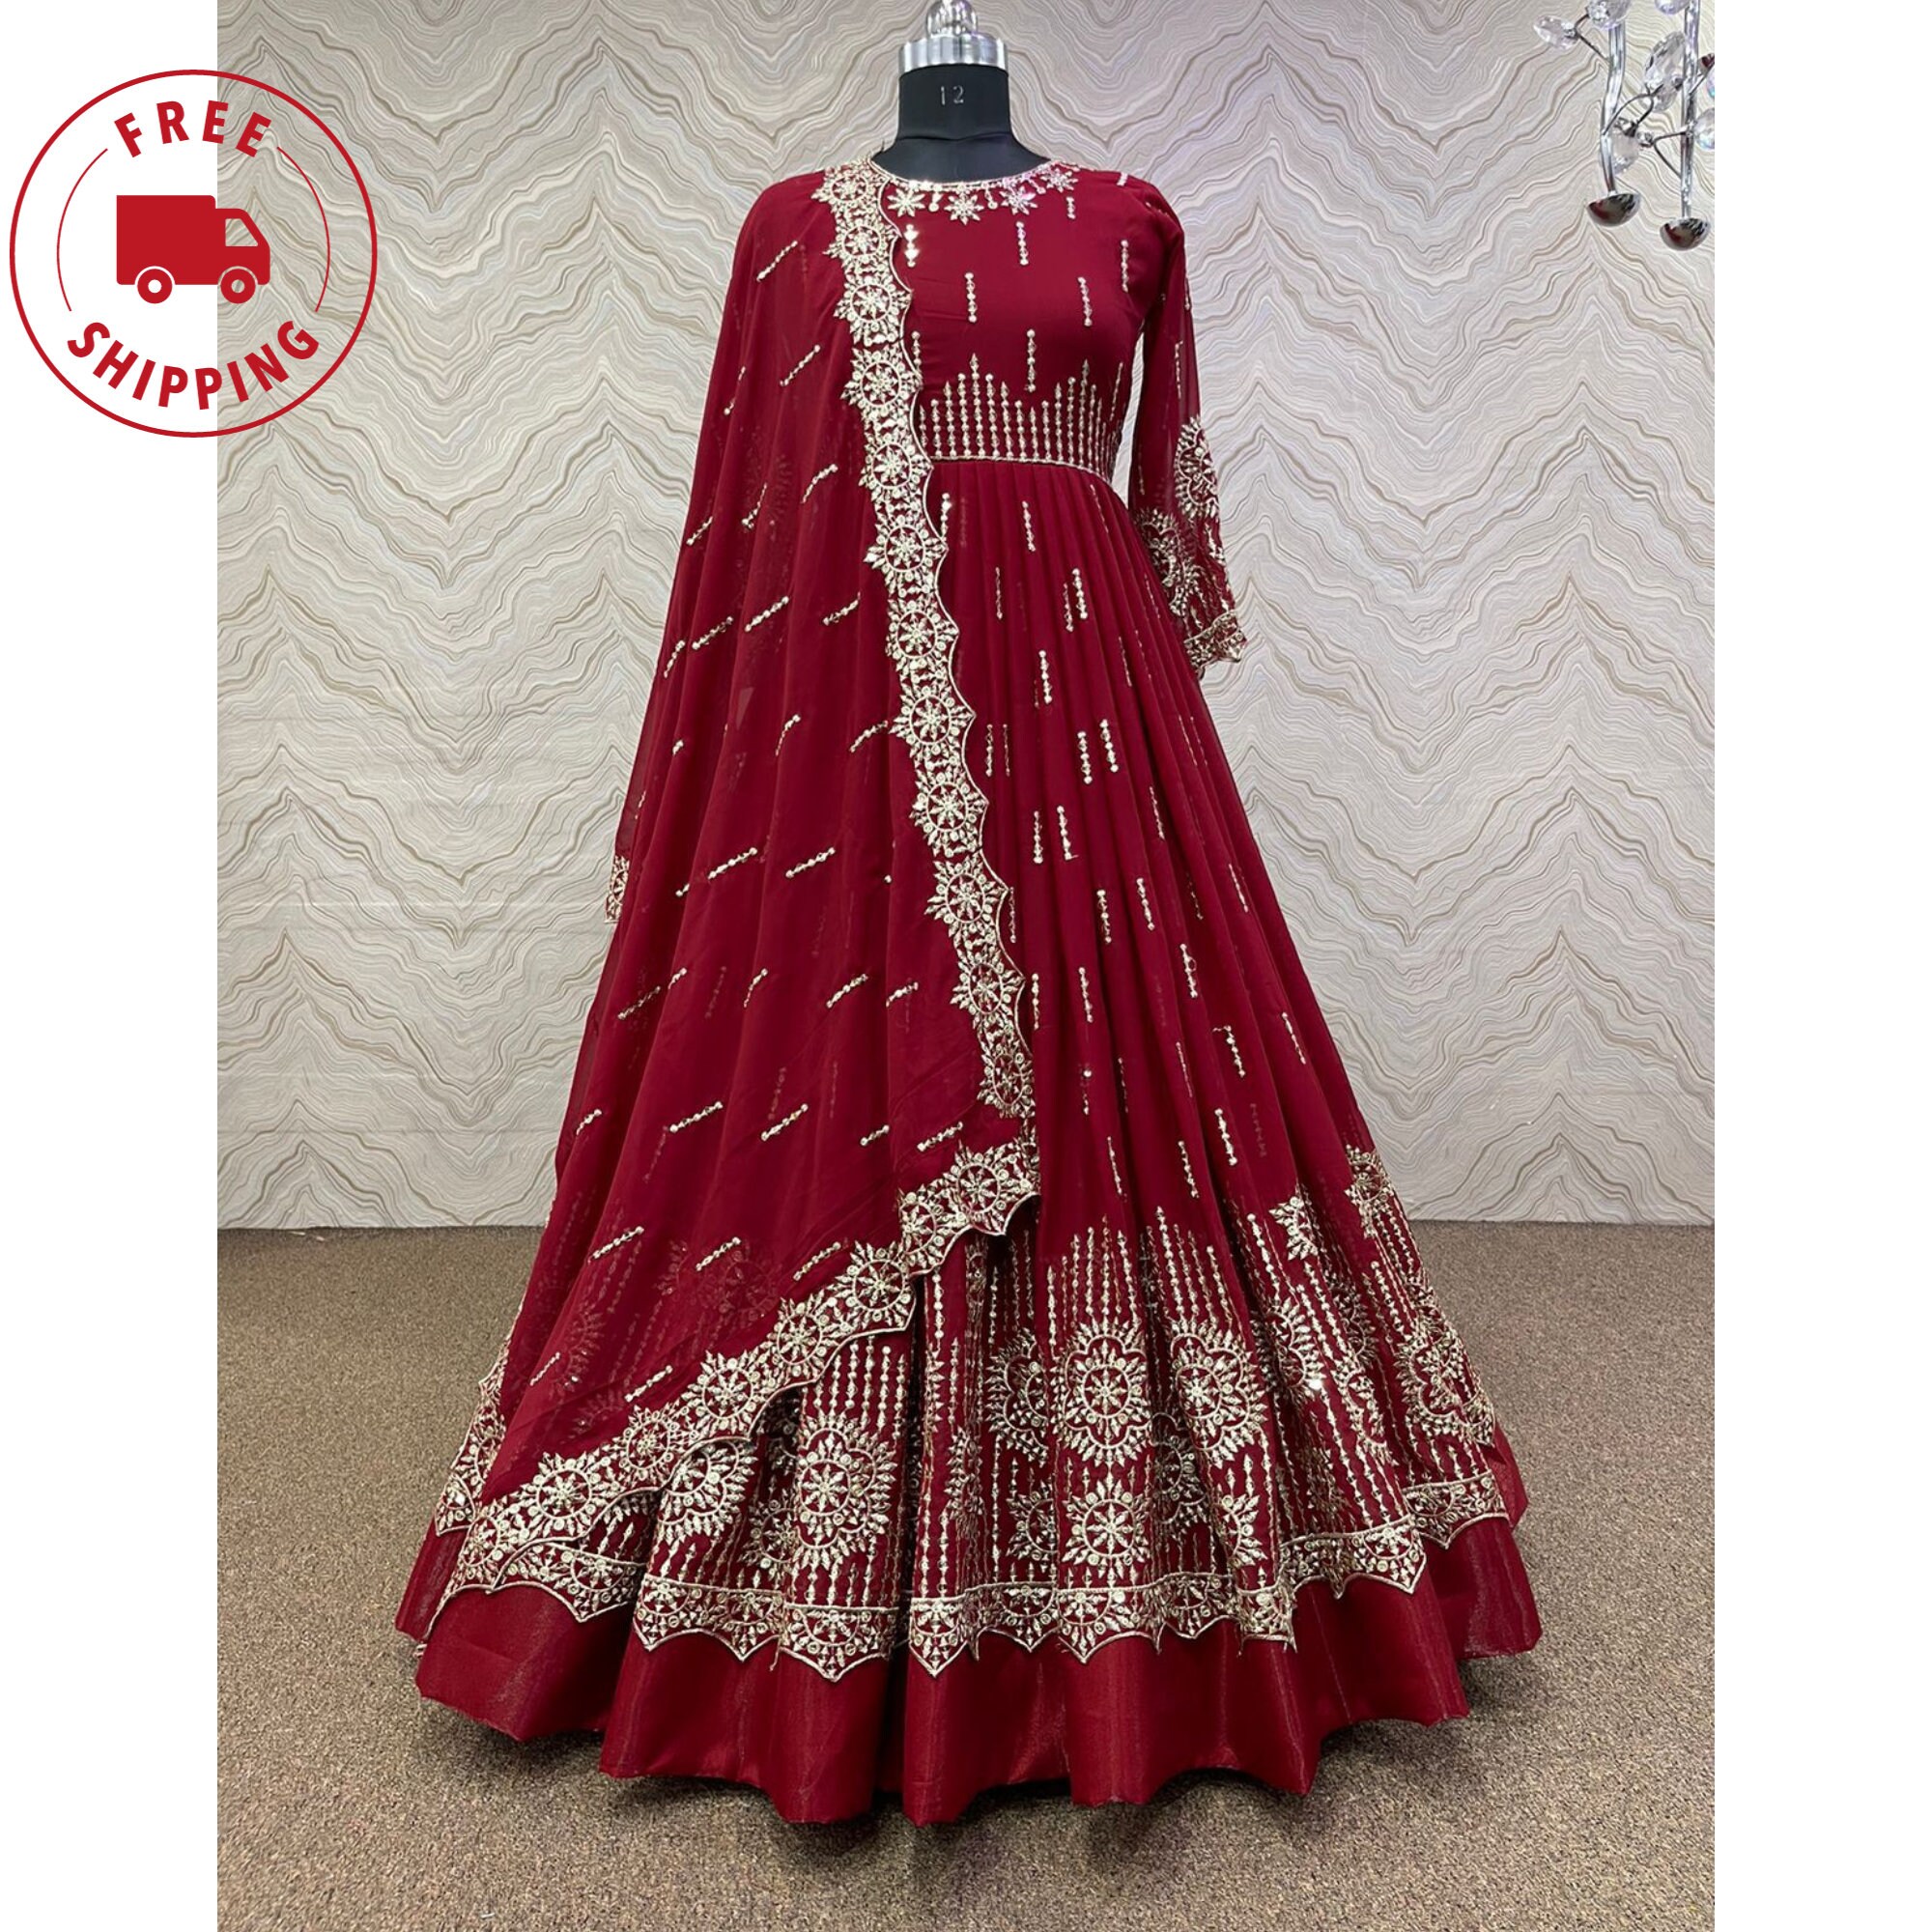 Trending Anarkali Suit in Red Embroidered Fabric LSTV113260